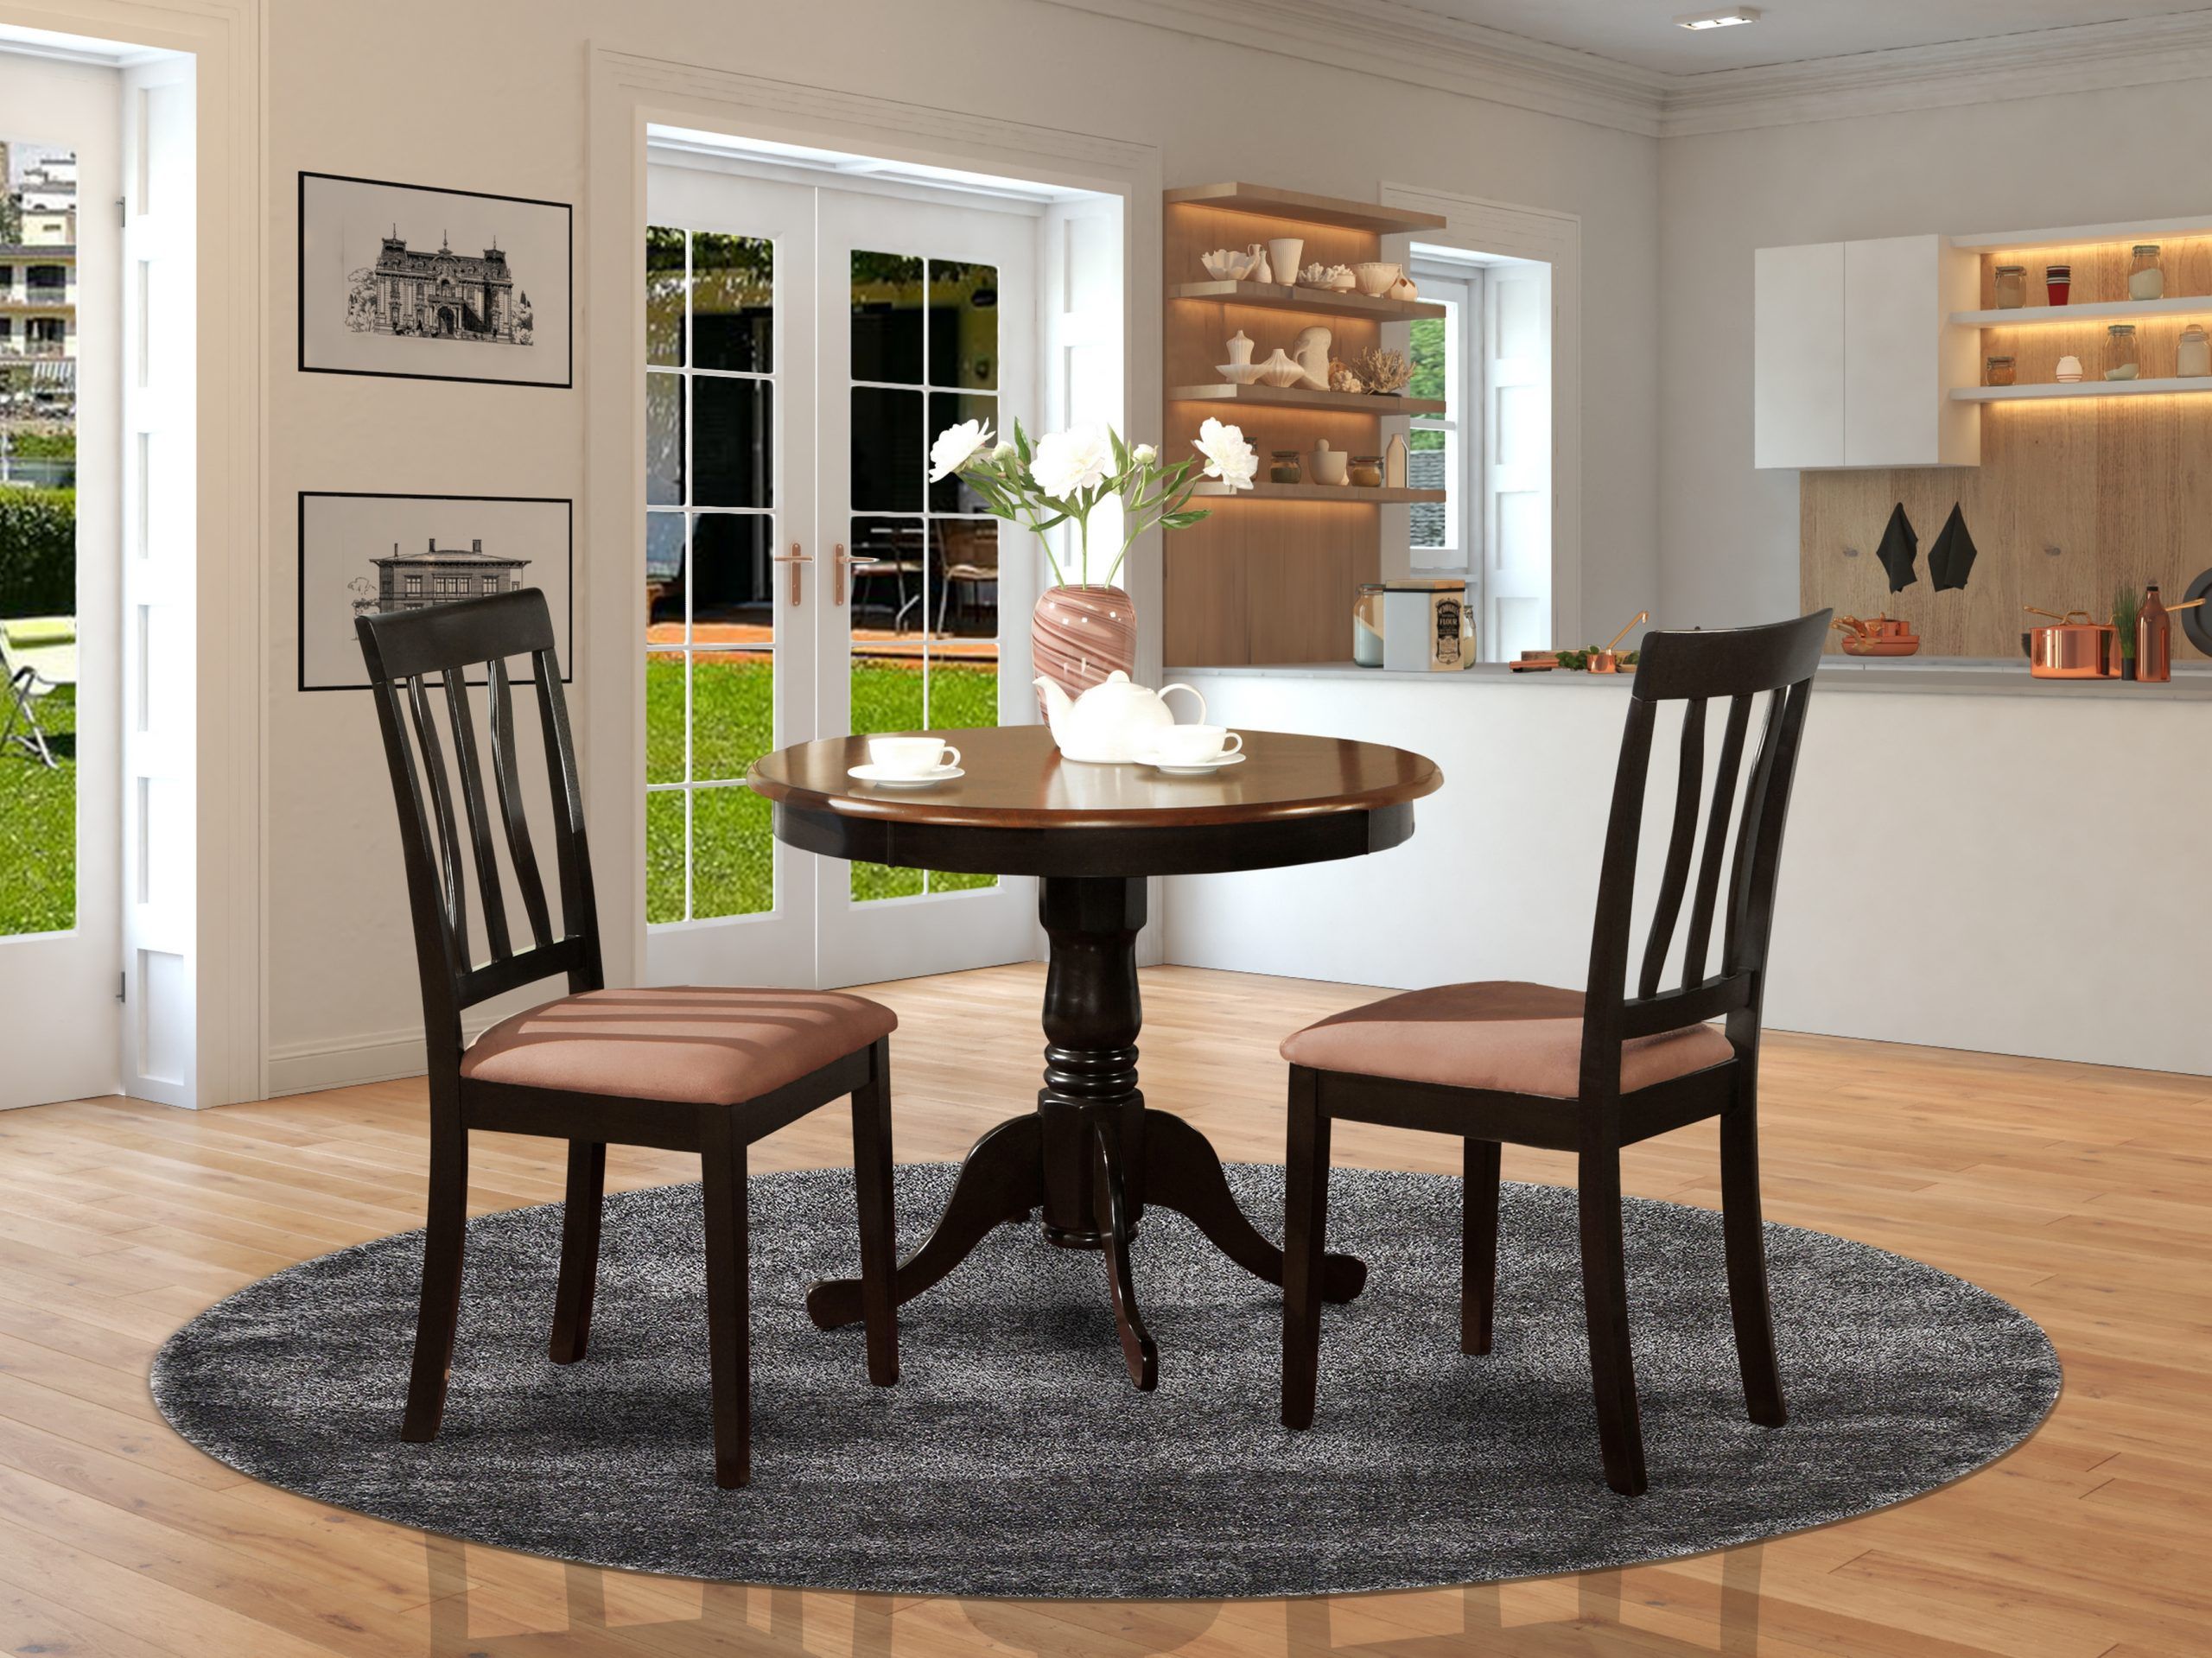 Anti3 Blk C 3 Pc Kitchen Table Set Round Kitchen Table Plus 2 Dining In 2 Piece Round Console Tables Set (View 2 of 20)